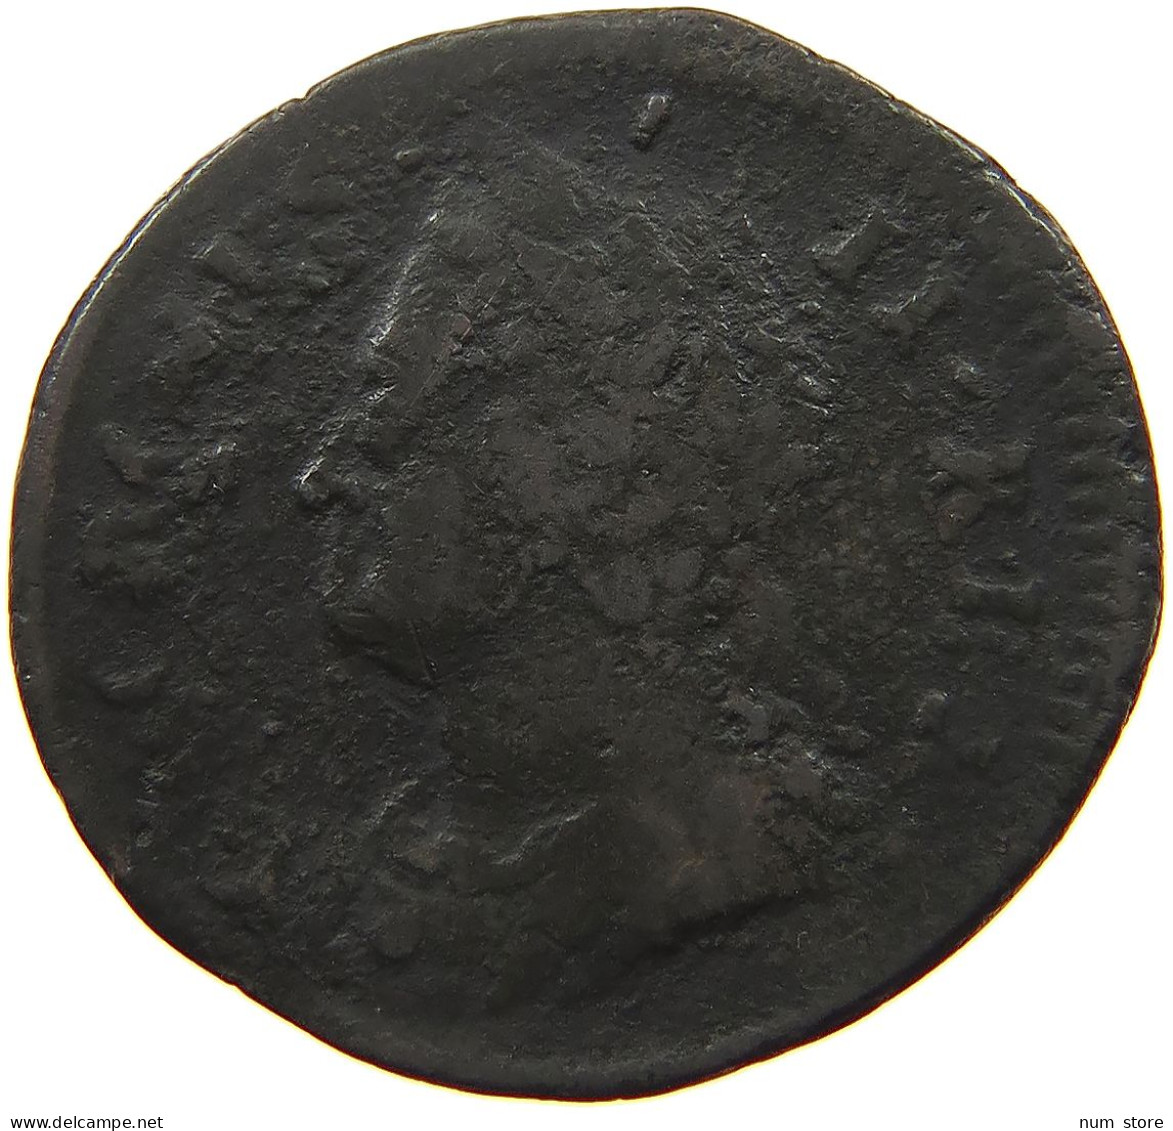 GREAT BRITAIN FARTHING 1734 George II. 1727-1760. DOUBLE TRUCK REVERSE RARE #t149 0329 - A. 1 Farthing